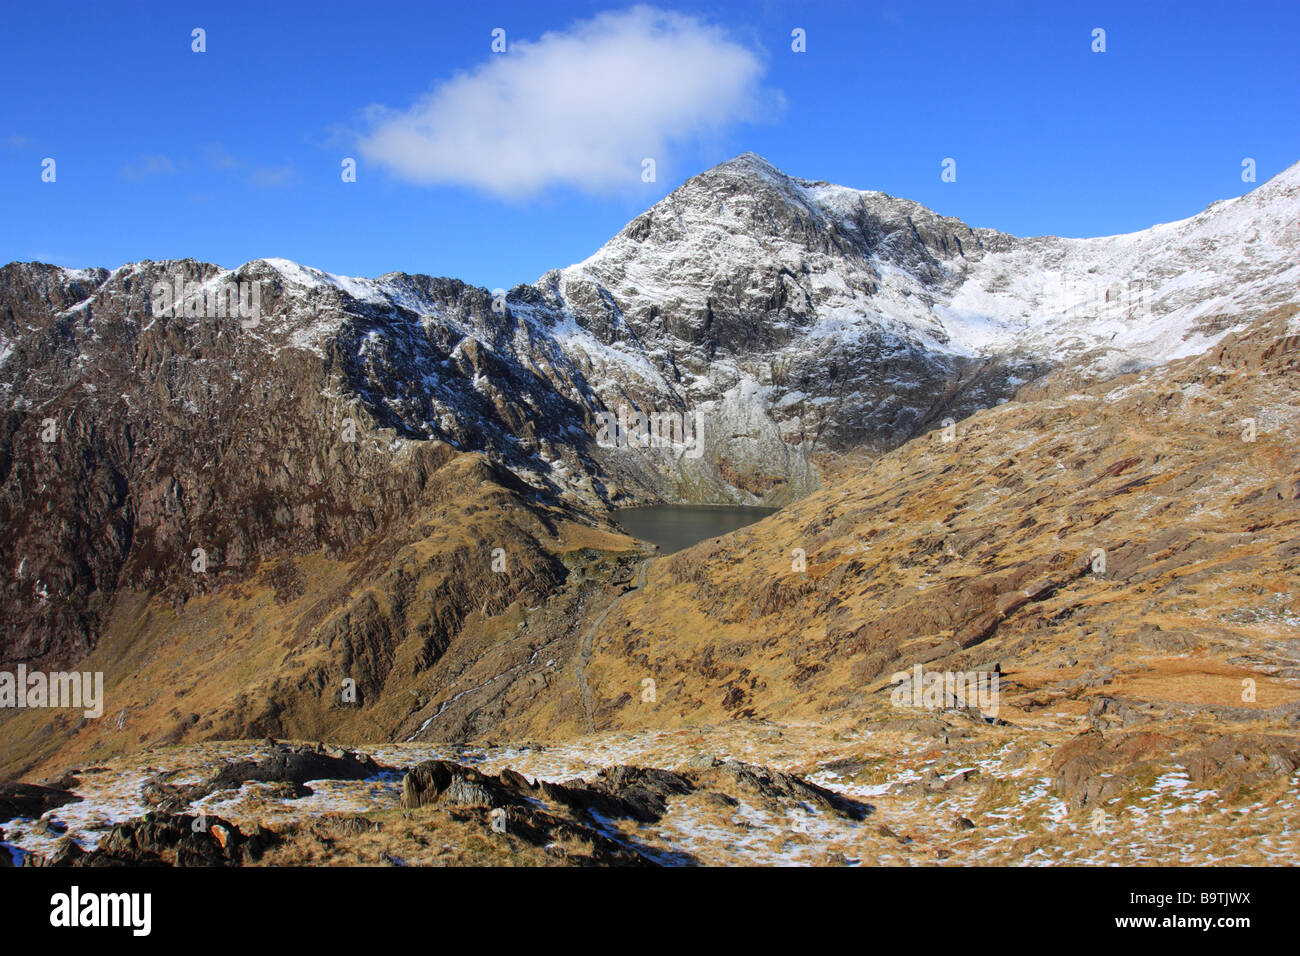 Yr Wyddfa, the summit of Snowdon and the highest peak in Wales, viewed from the Pyg track ascent Stock Photo